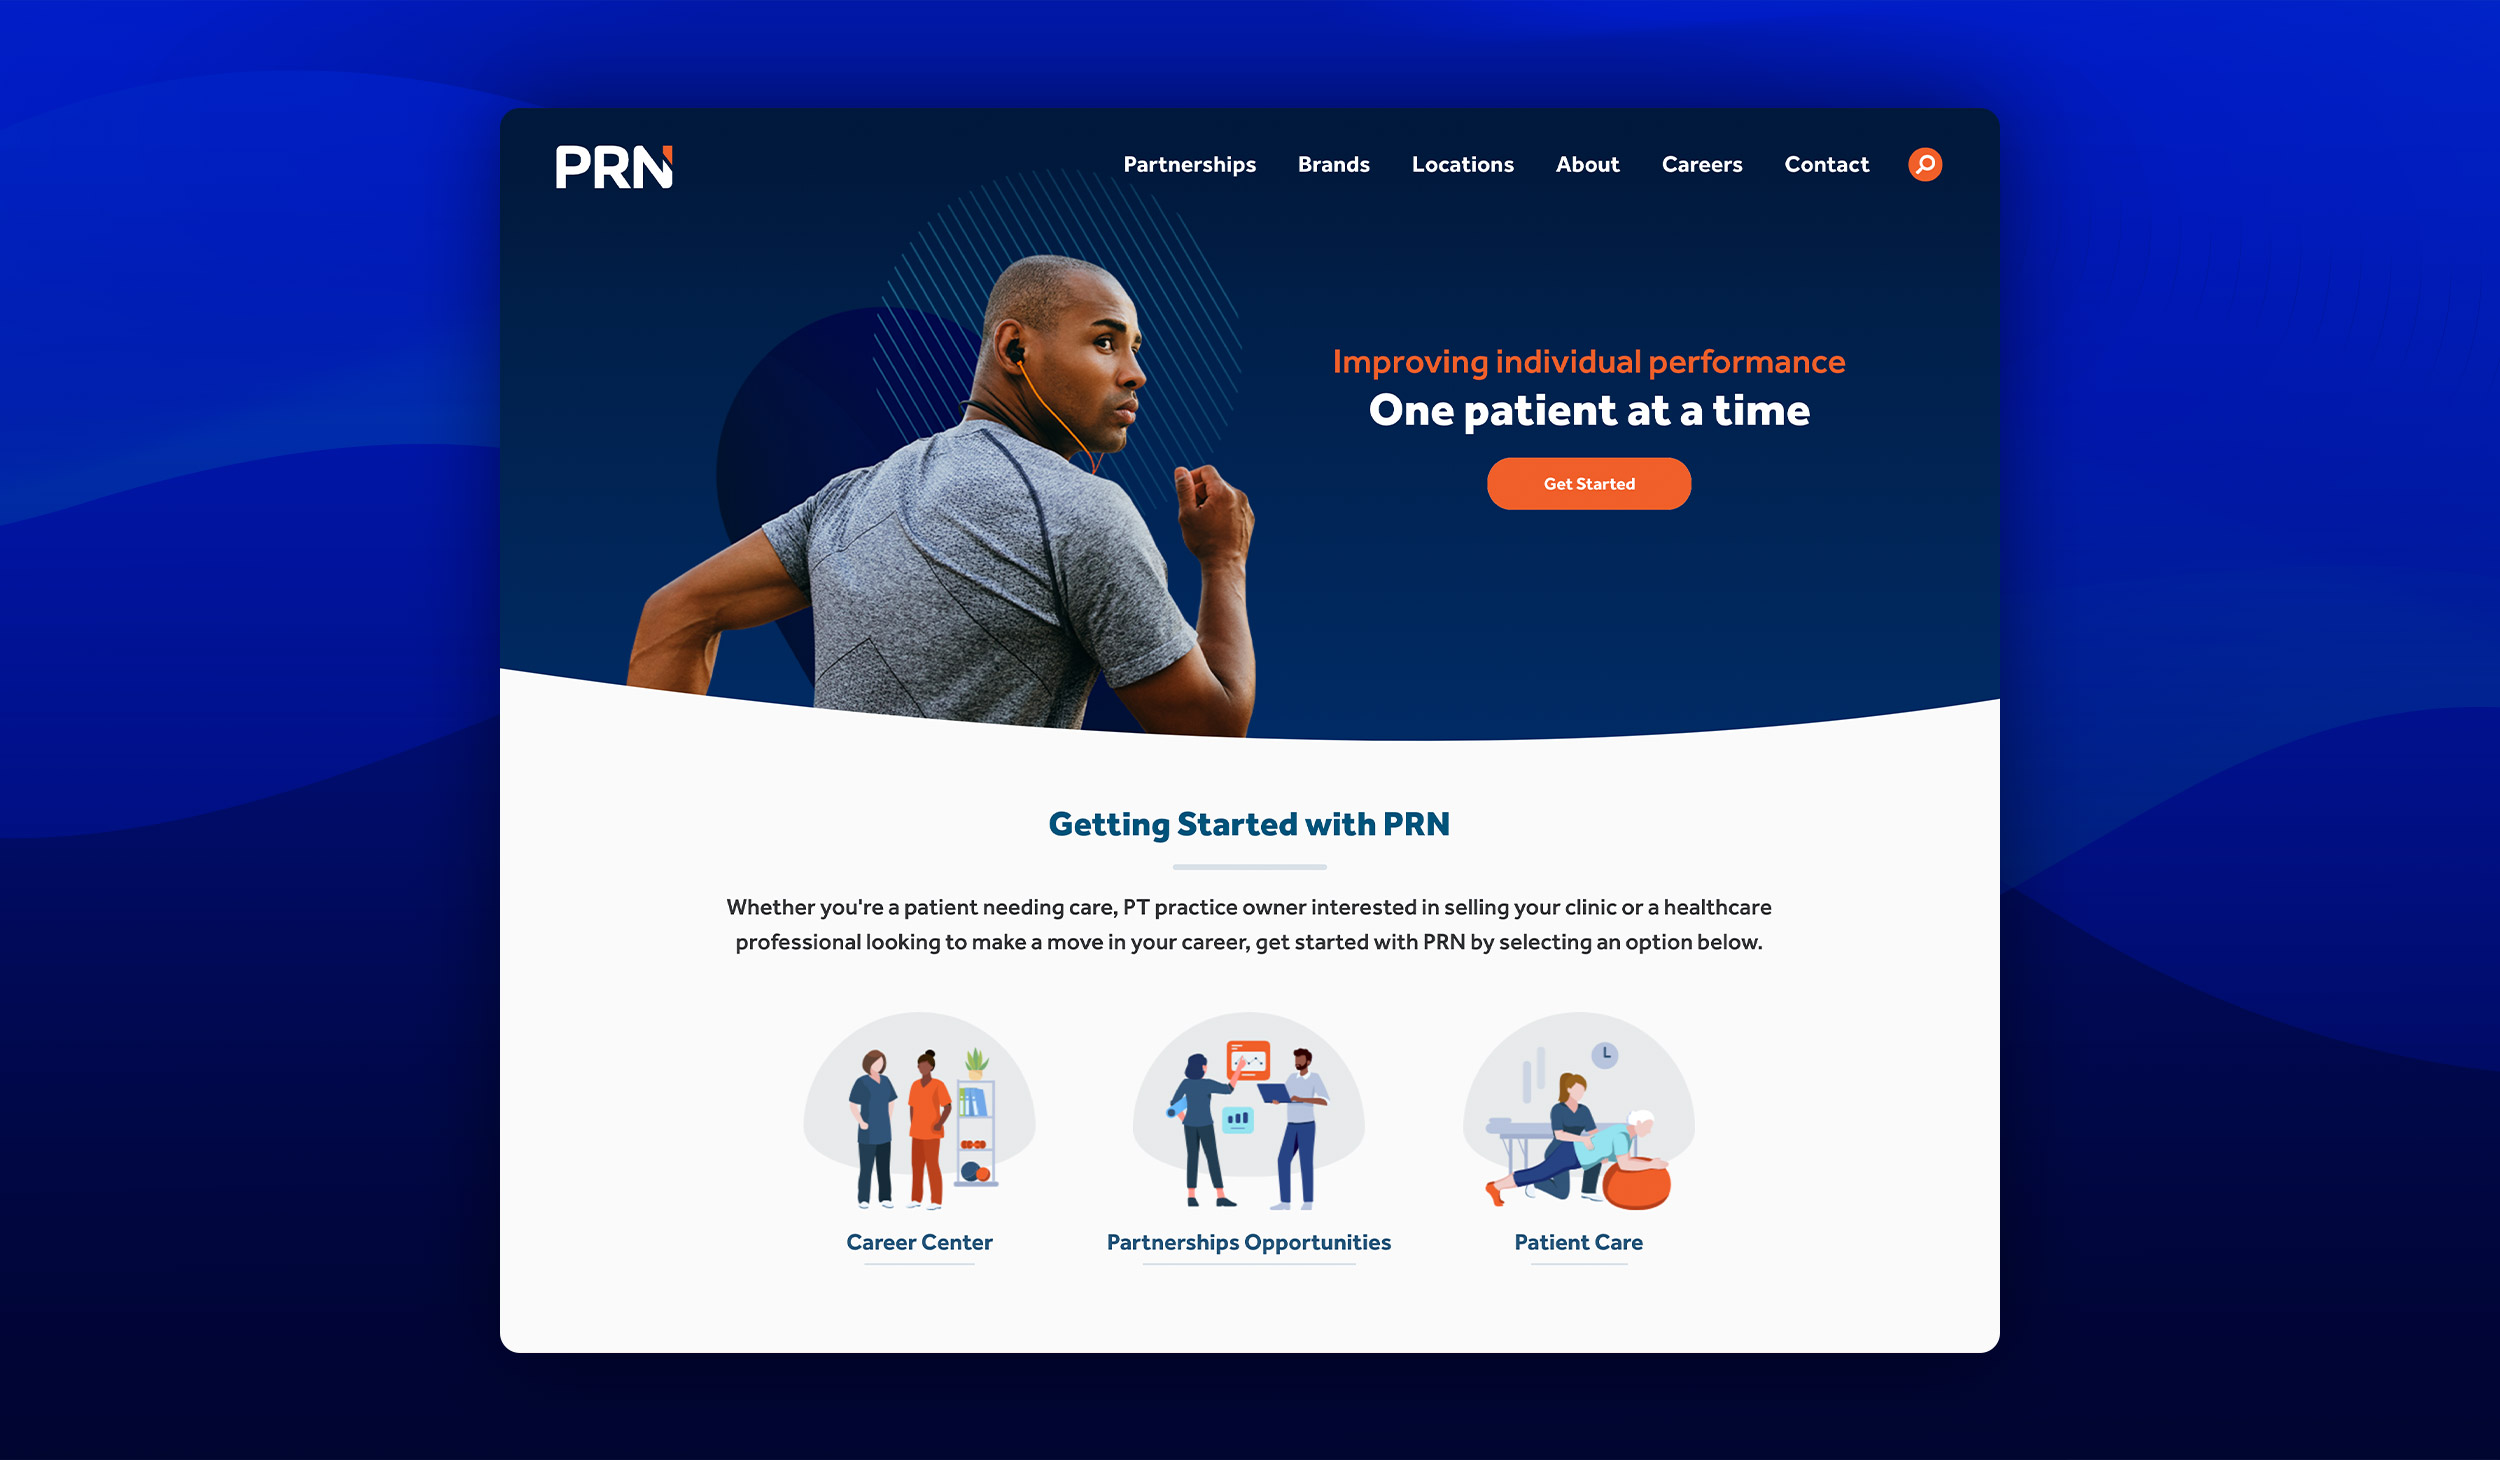 View the Physical Rehabilitation Network (PRN) project details